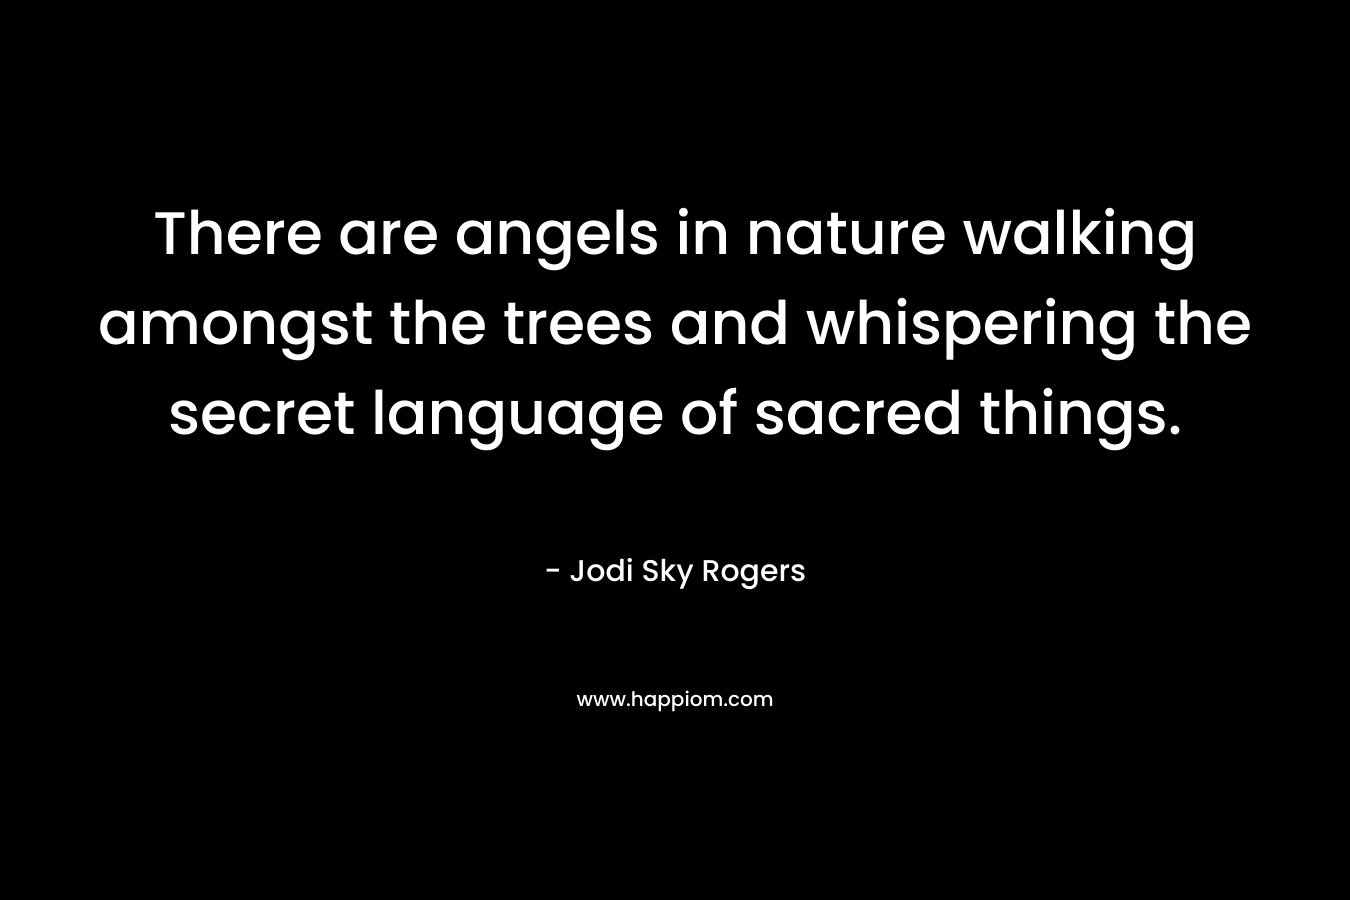 There are angels in nature walking amongst the trees and whispering the secret language of sacred things. – Jodi Sky Rogers